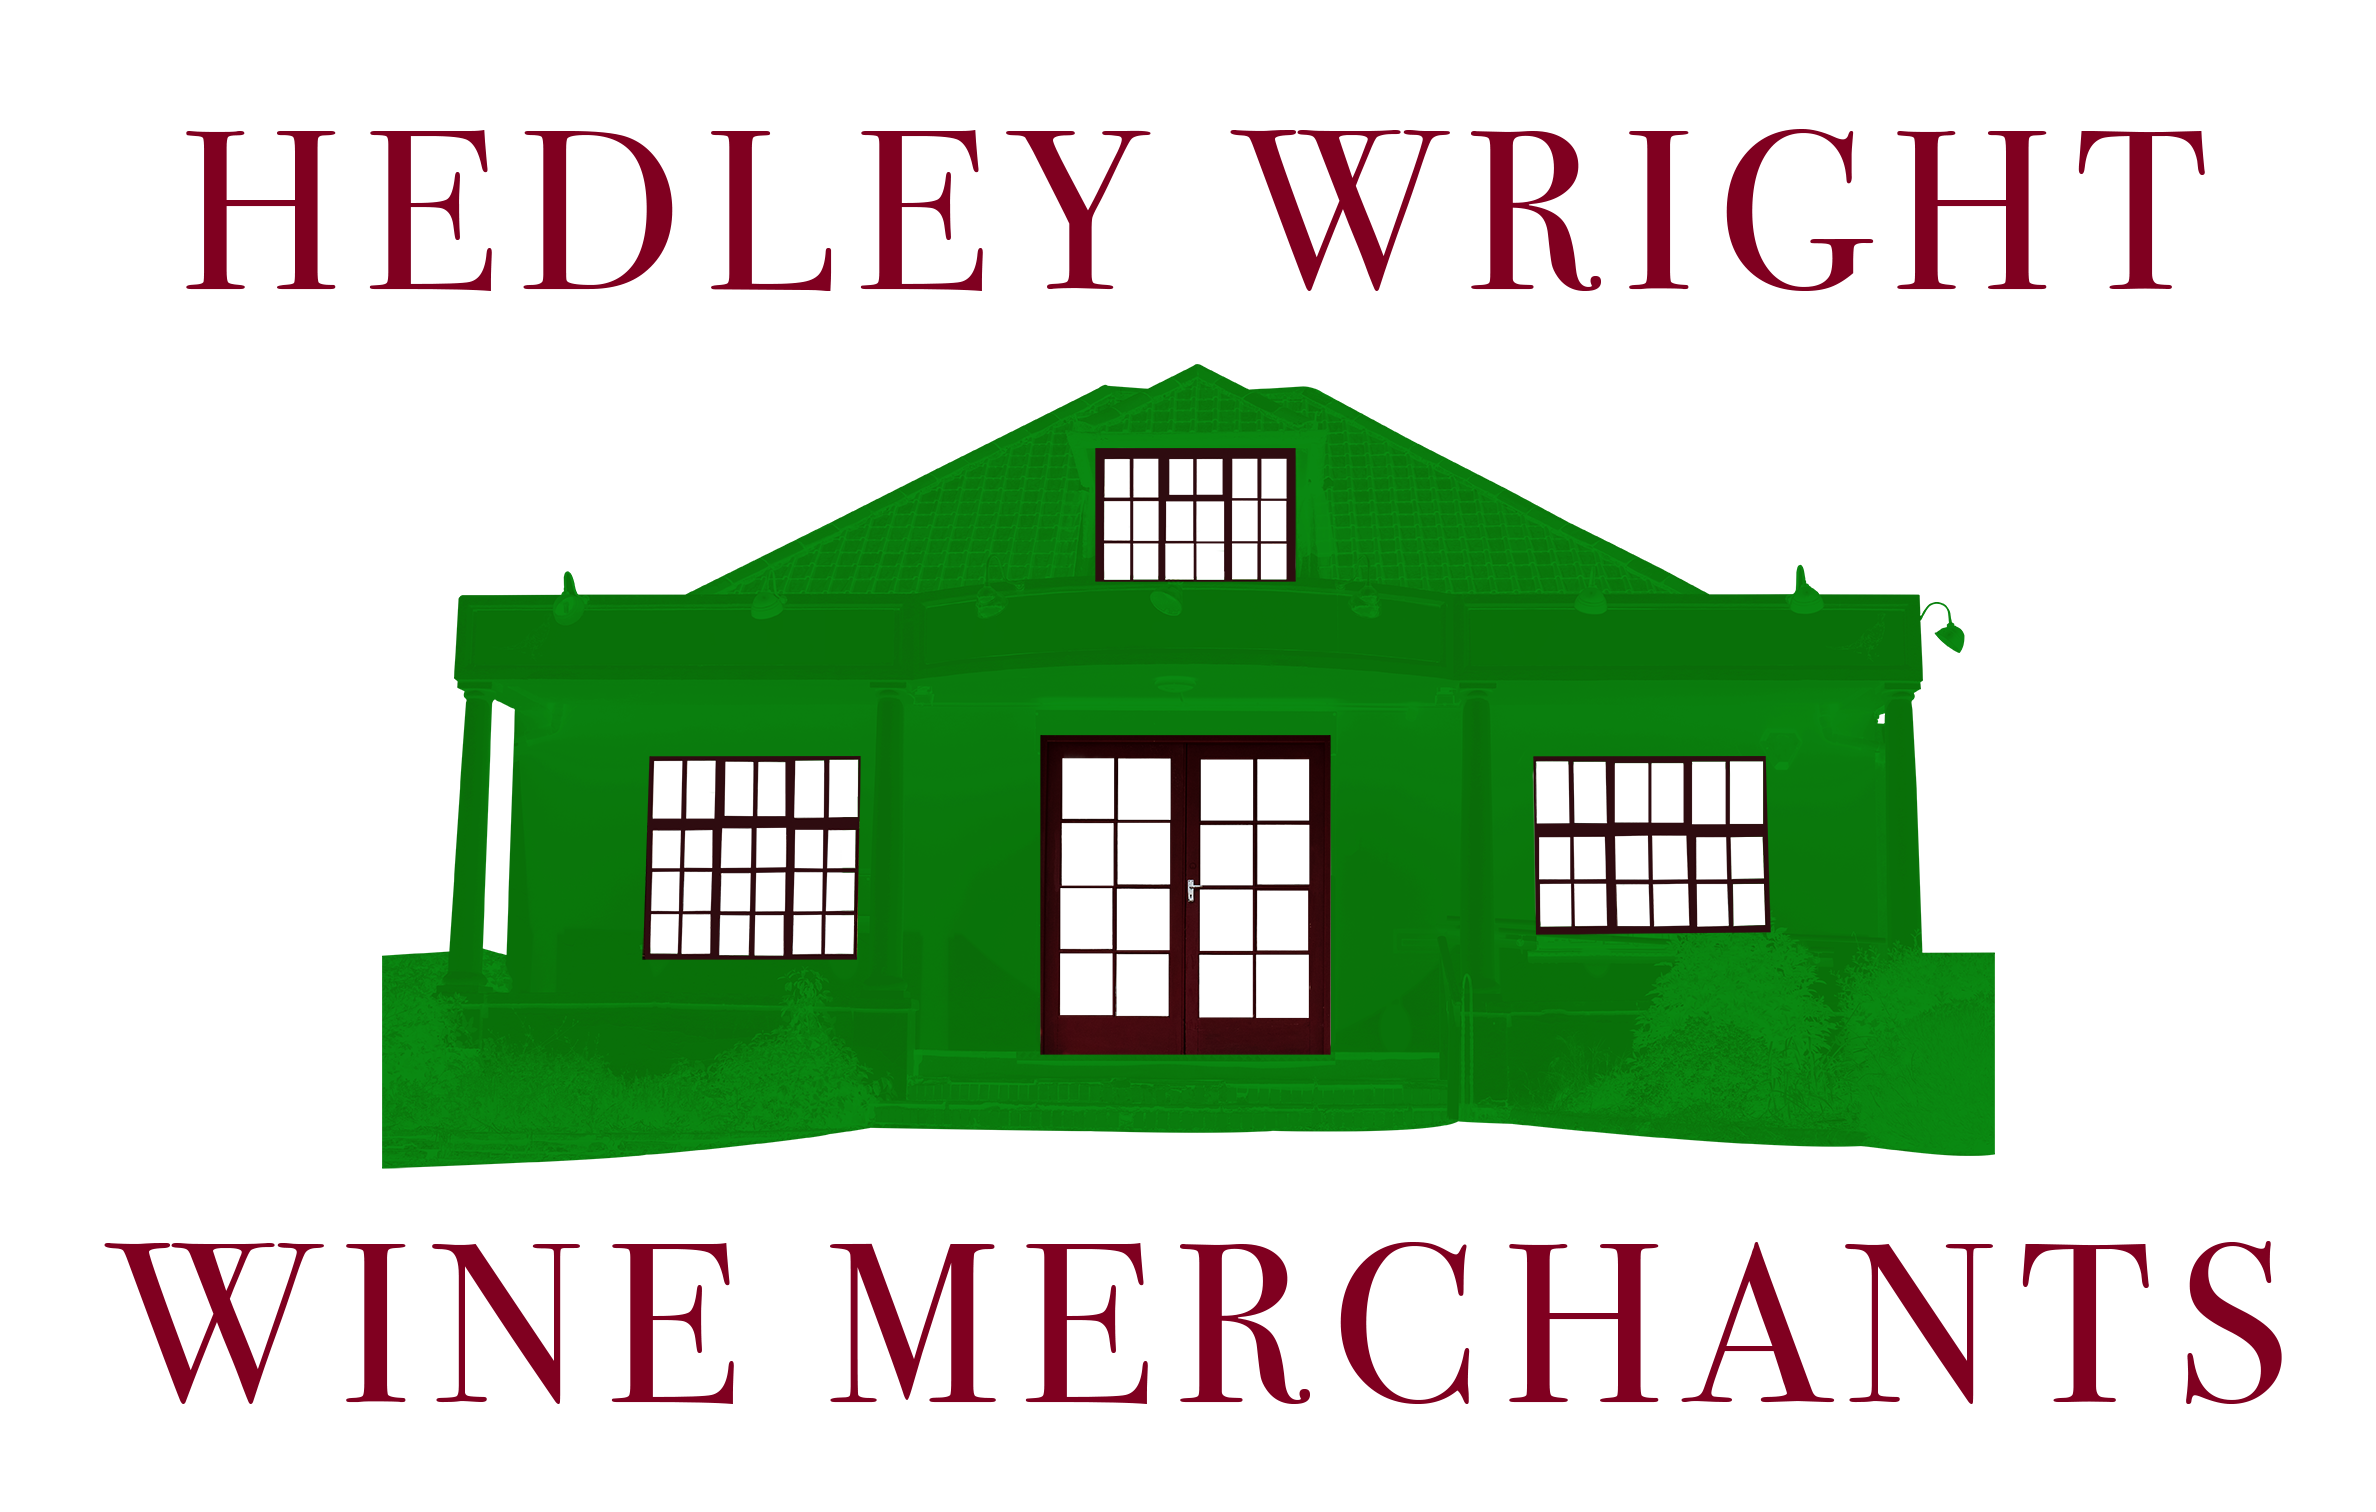 Hedley Wright Wine Merchants, A Trading Name Of The Hitchin Wine Company Limited